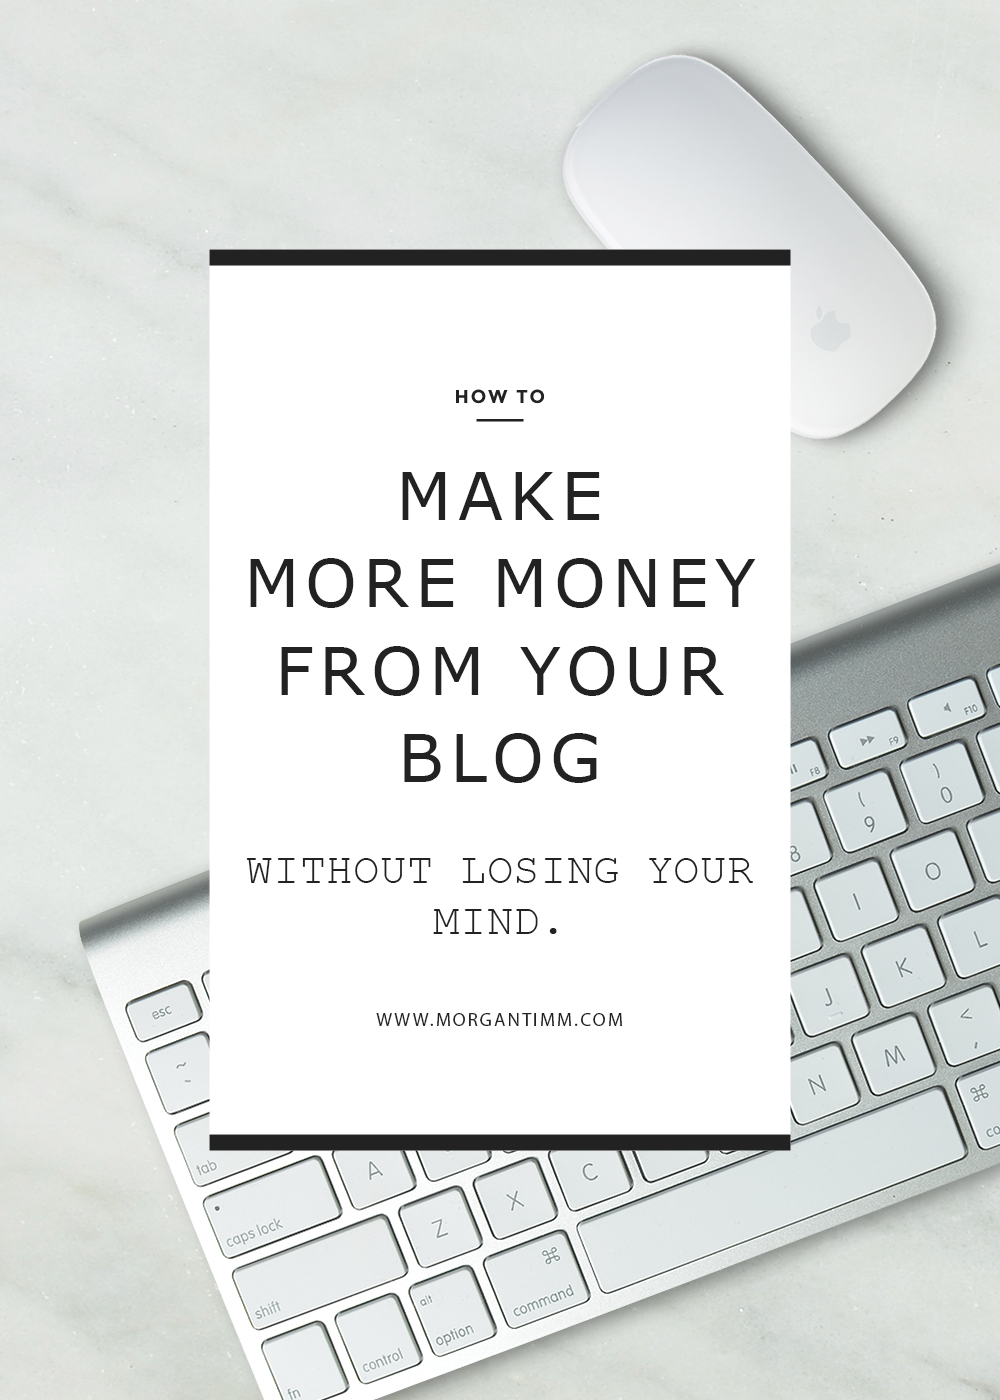 Wondering how you can go about making more money with your blog? Let me help.